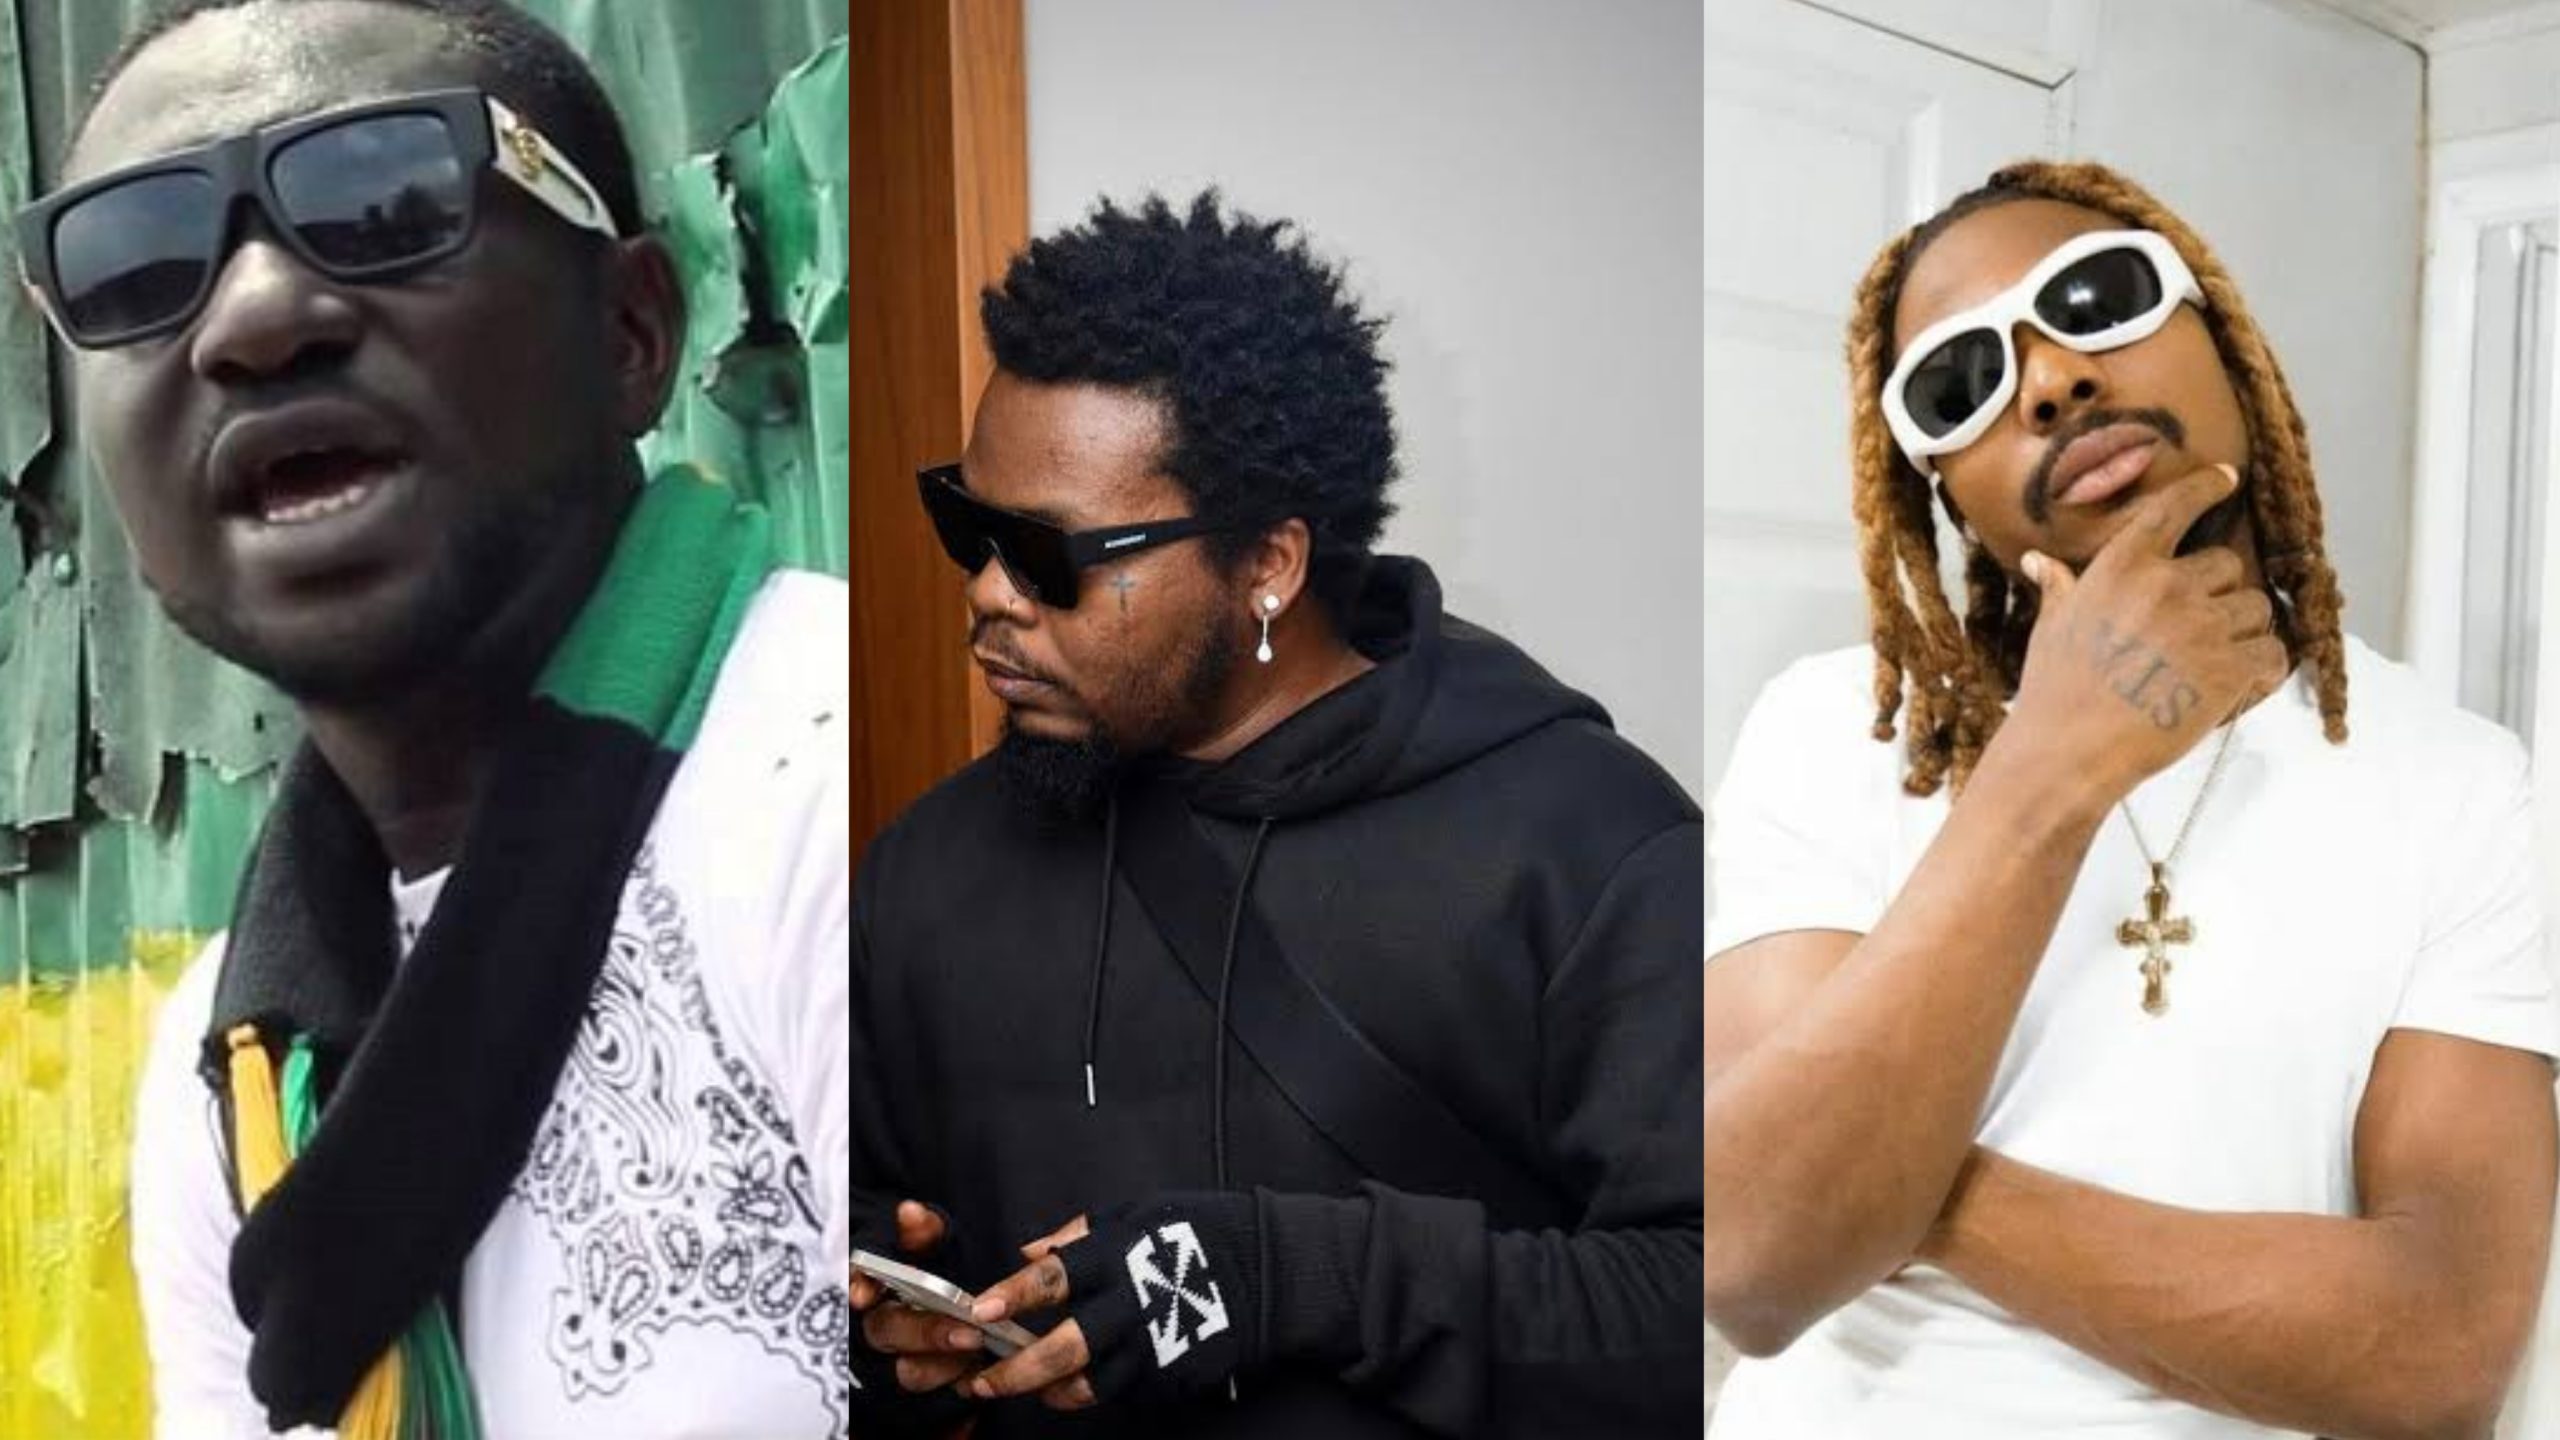 Olamide, Asake and others stole songs from me’ – Blackface lashes out